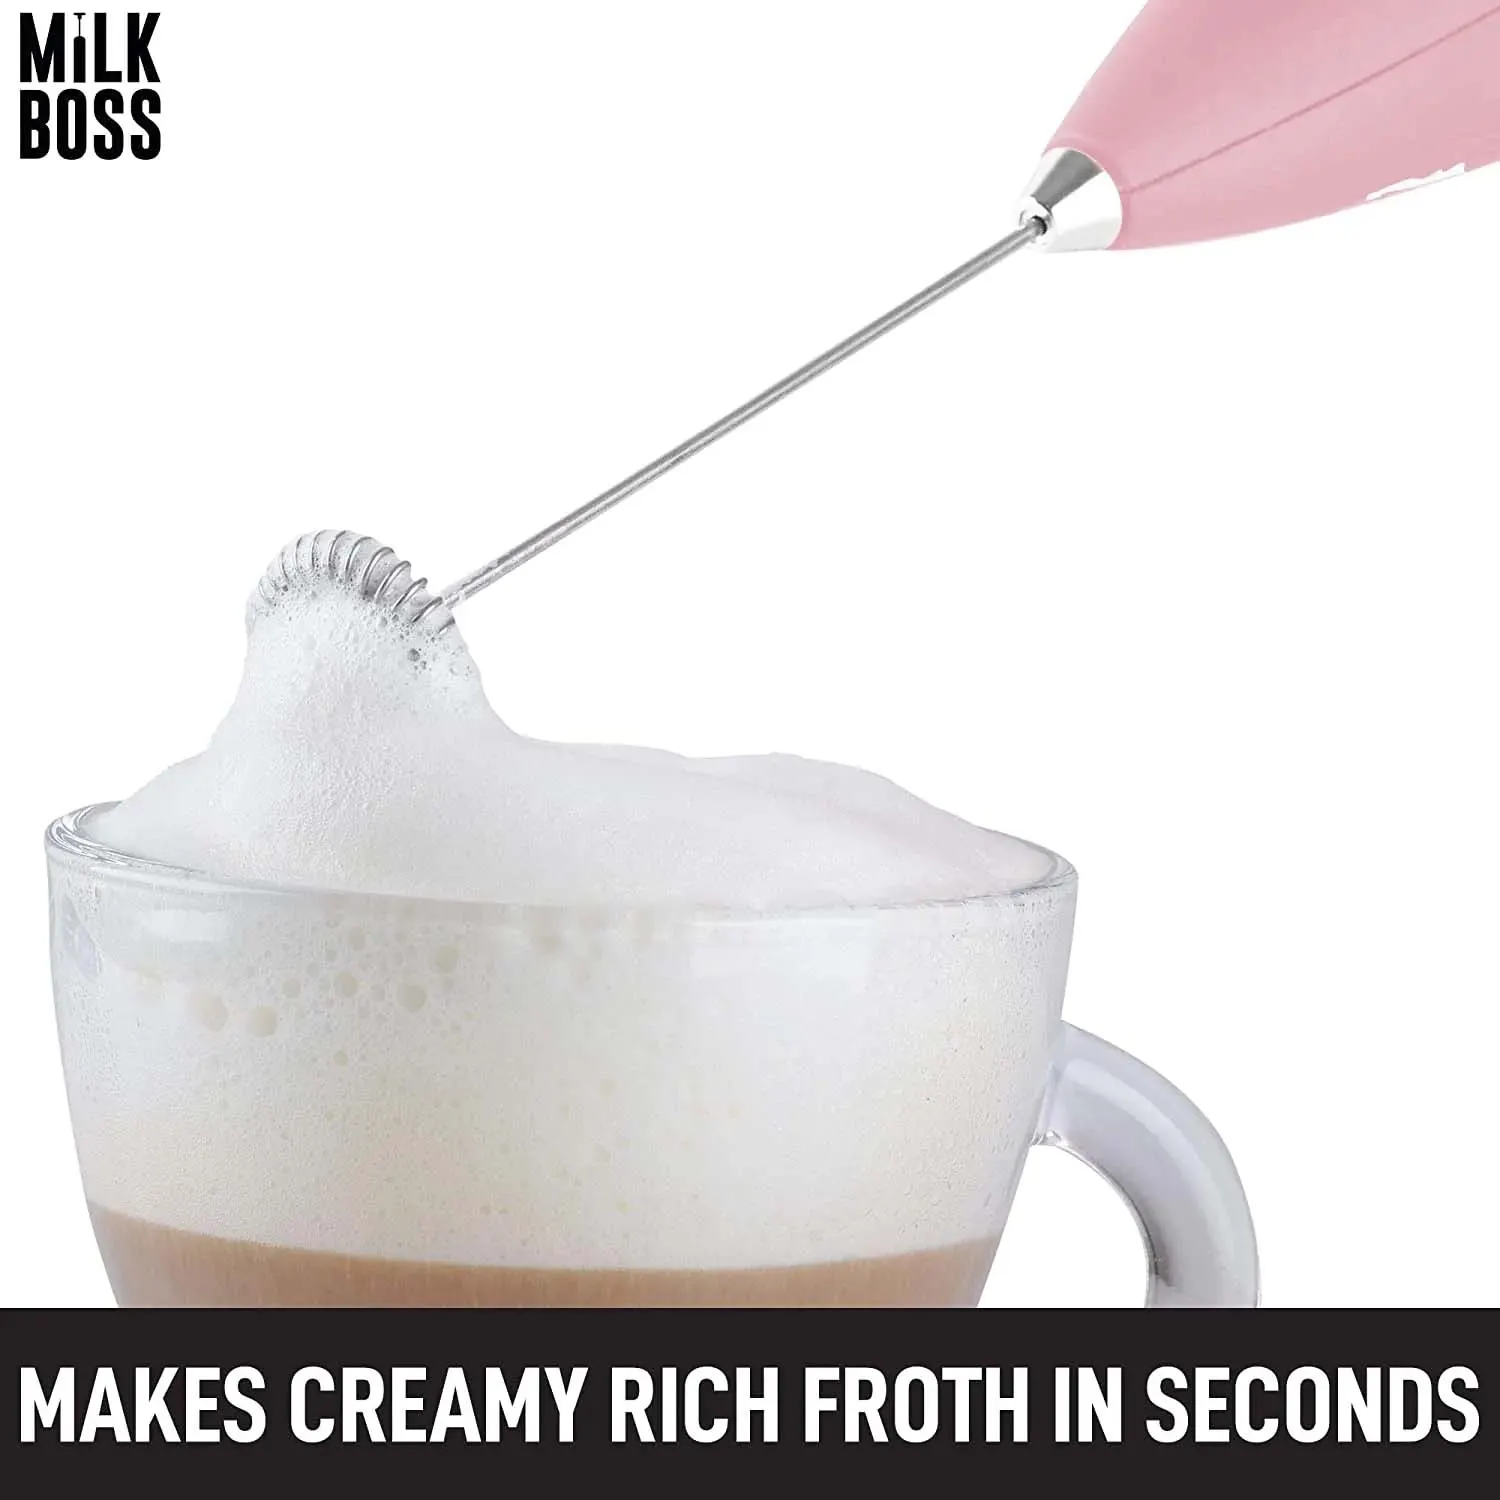 Milk Boss Milk Frother With Holster Stand